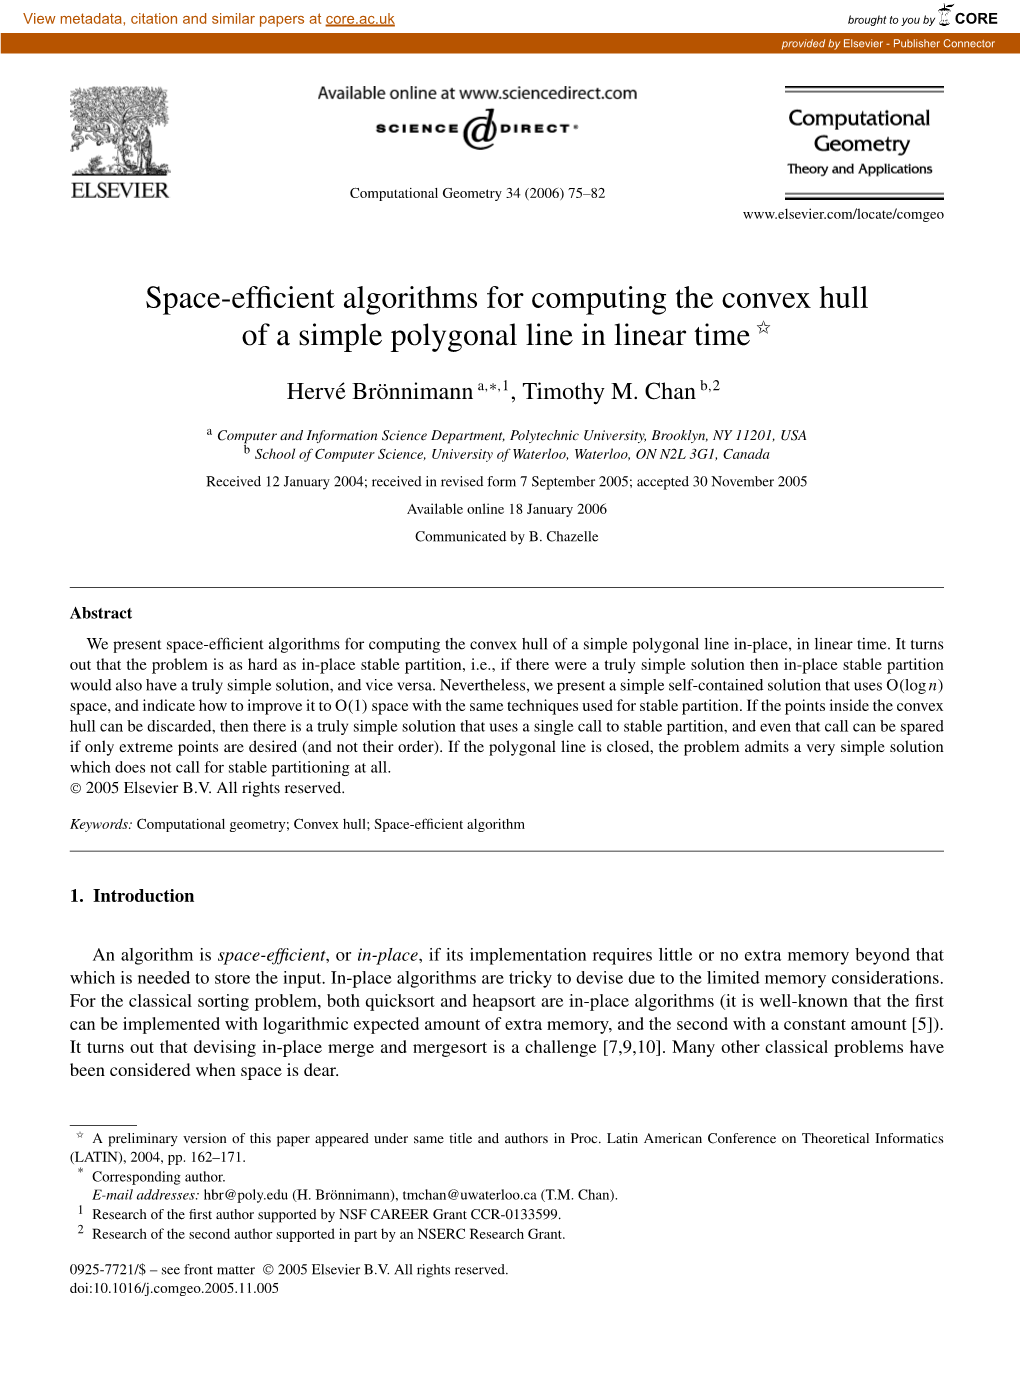 Space-Efficient Algorithms for Computing the Convex Hull of a Simple Polygonal Line in Linear Time